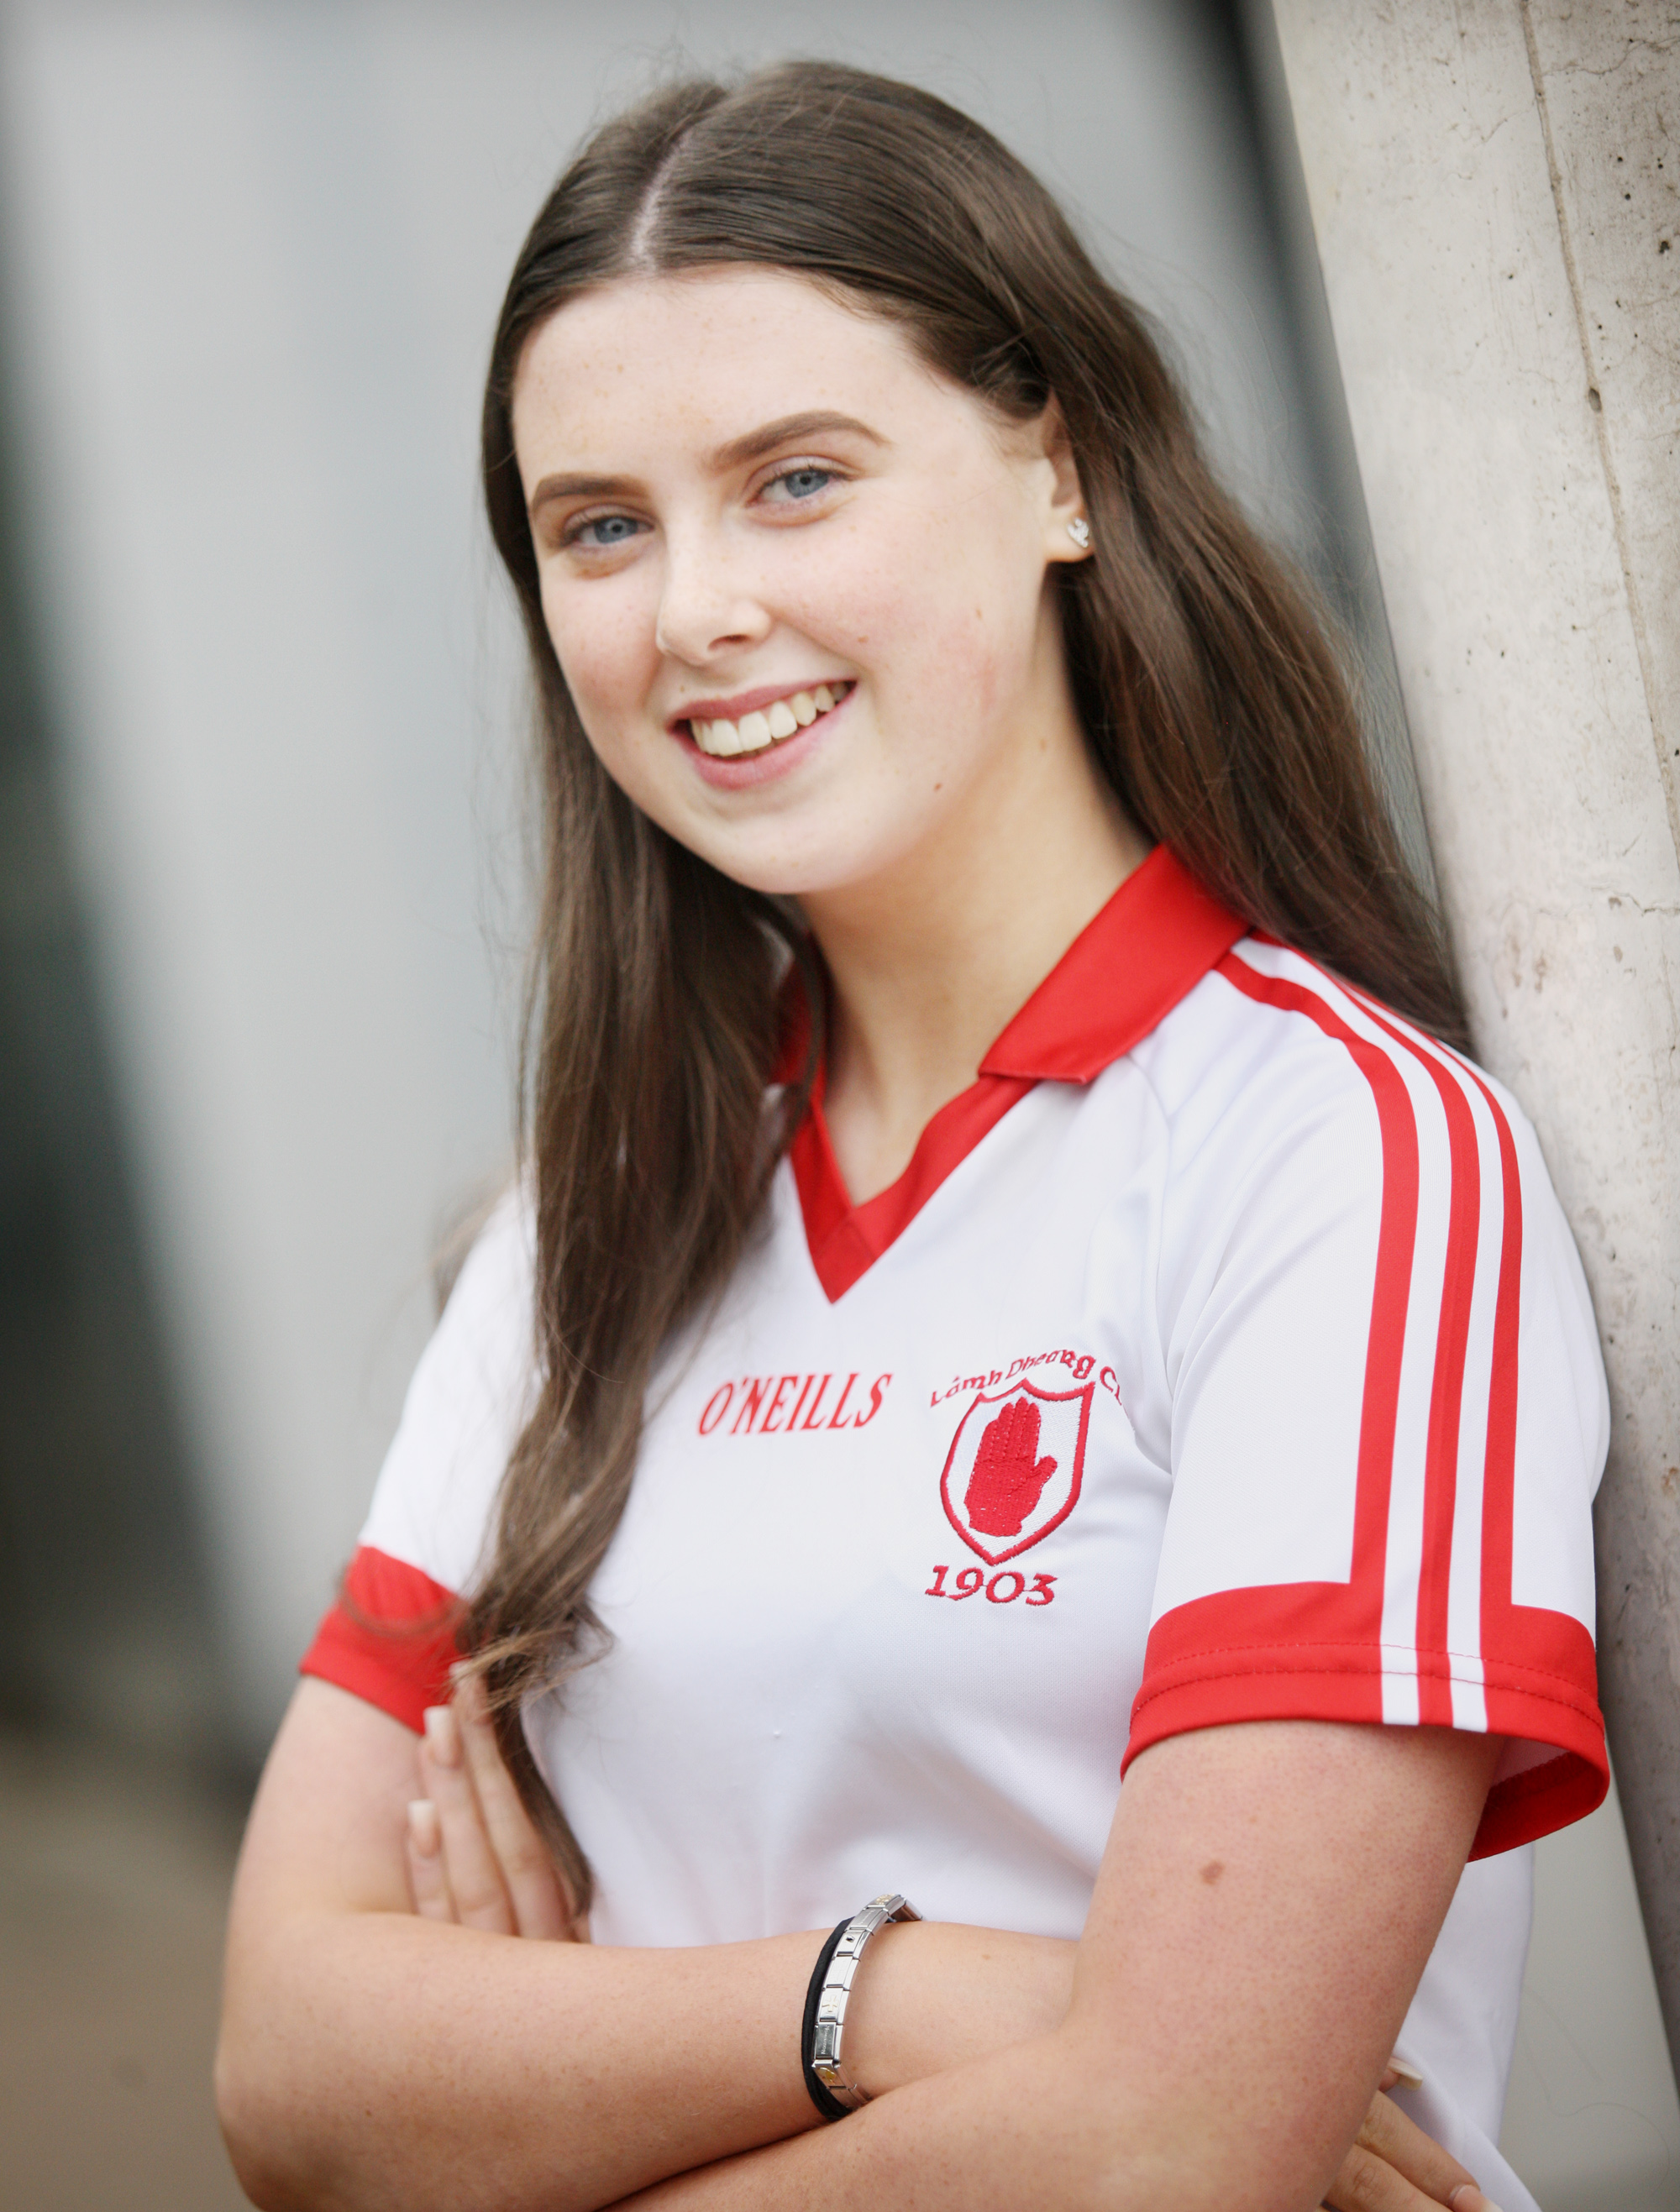 HONOUR: Méabh McNeill from Lámh Dhearg will be singing the national anthem at Croke Park on Sunday before the Ladies Senior Football Final between Dublin and Galway